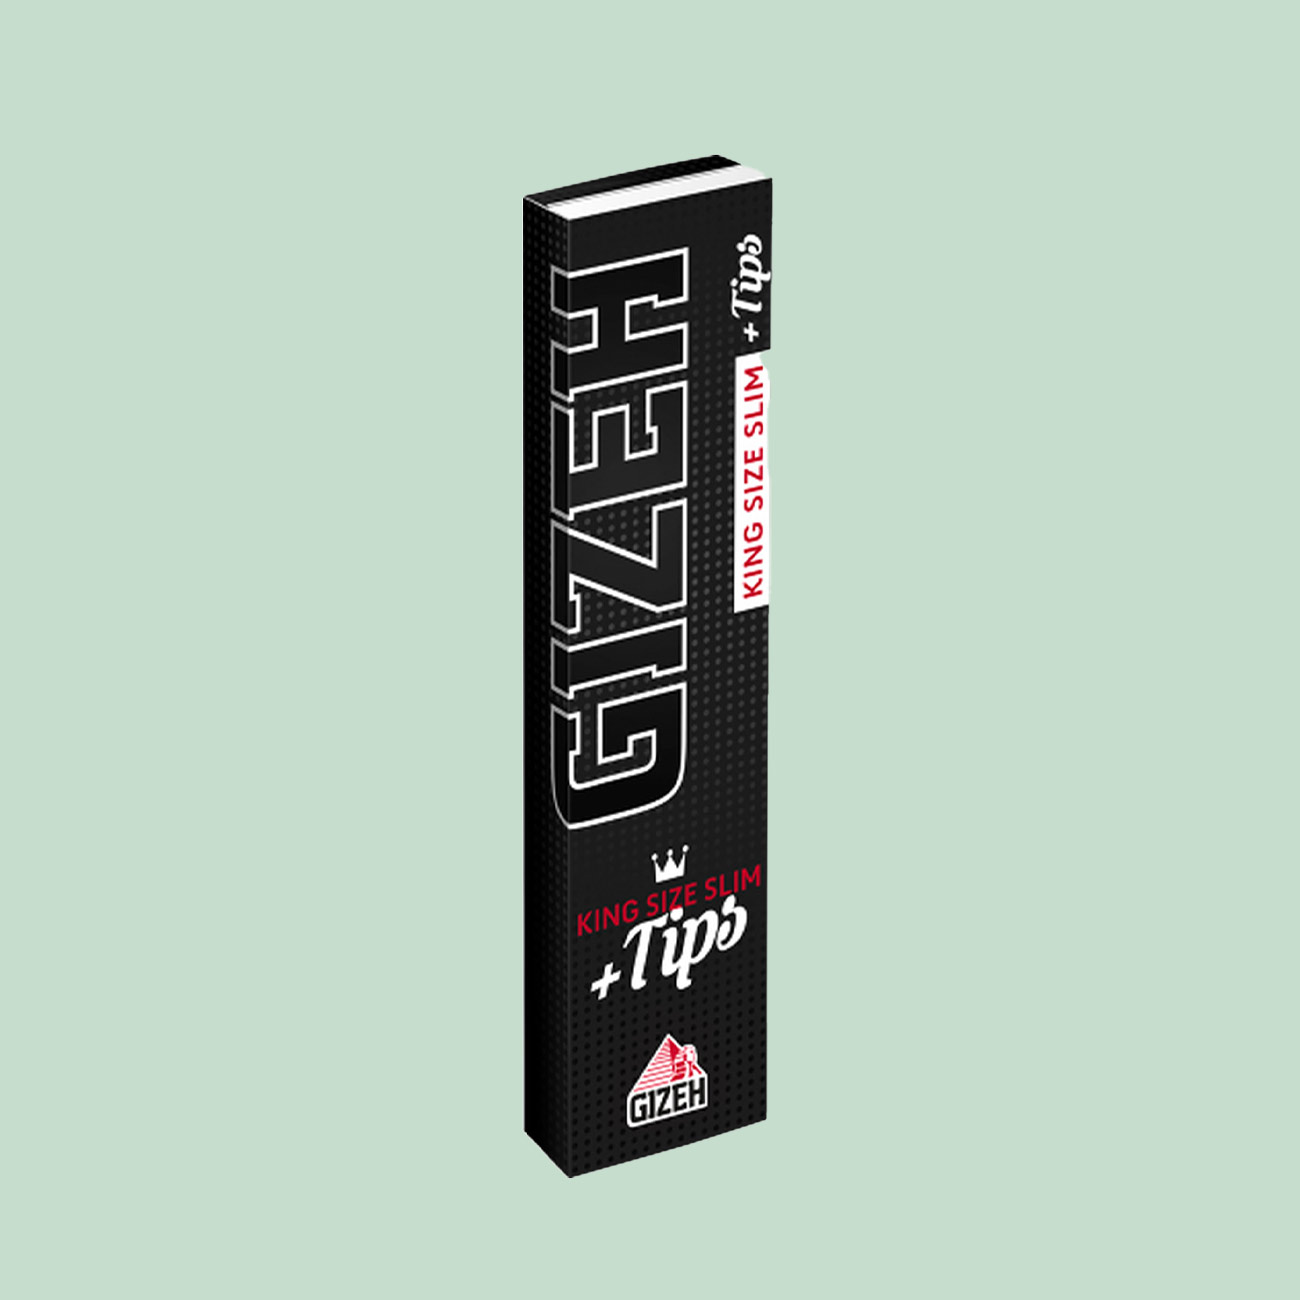 GIZEH Black King Size Papers & Tips